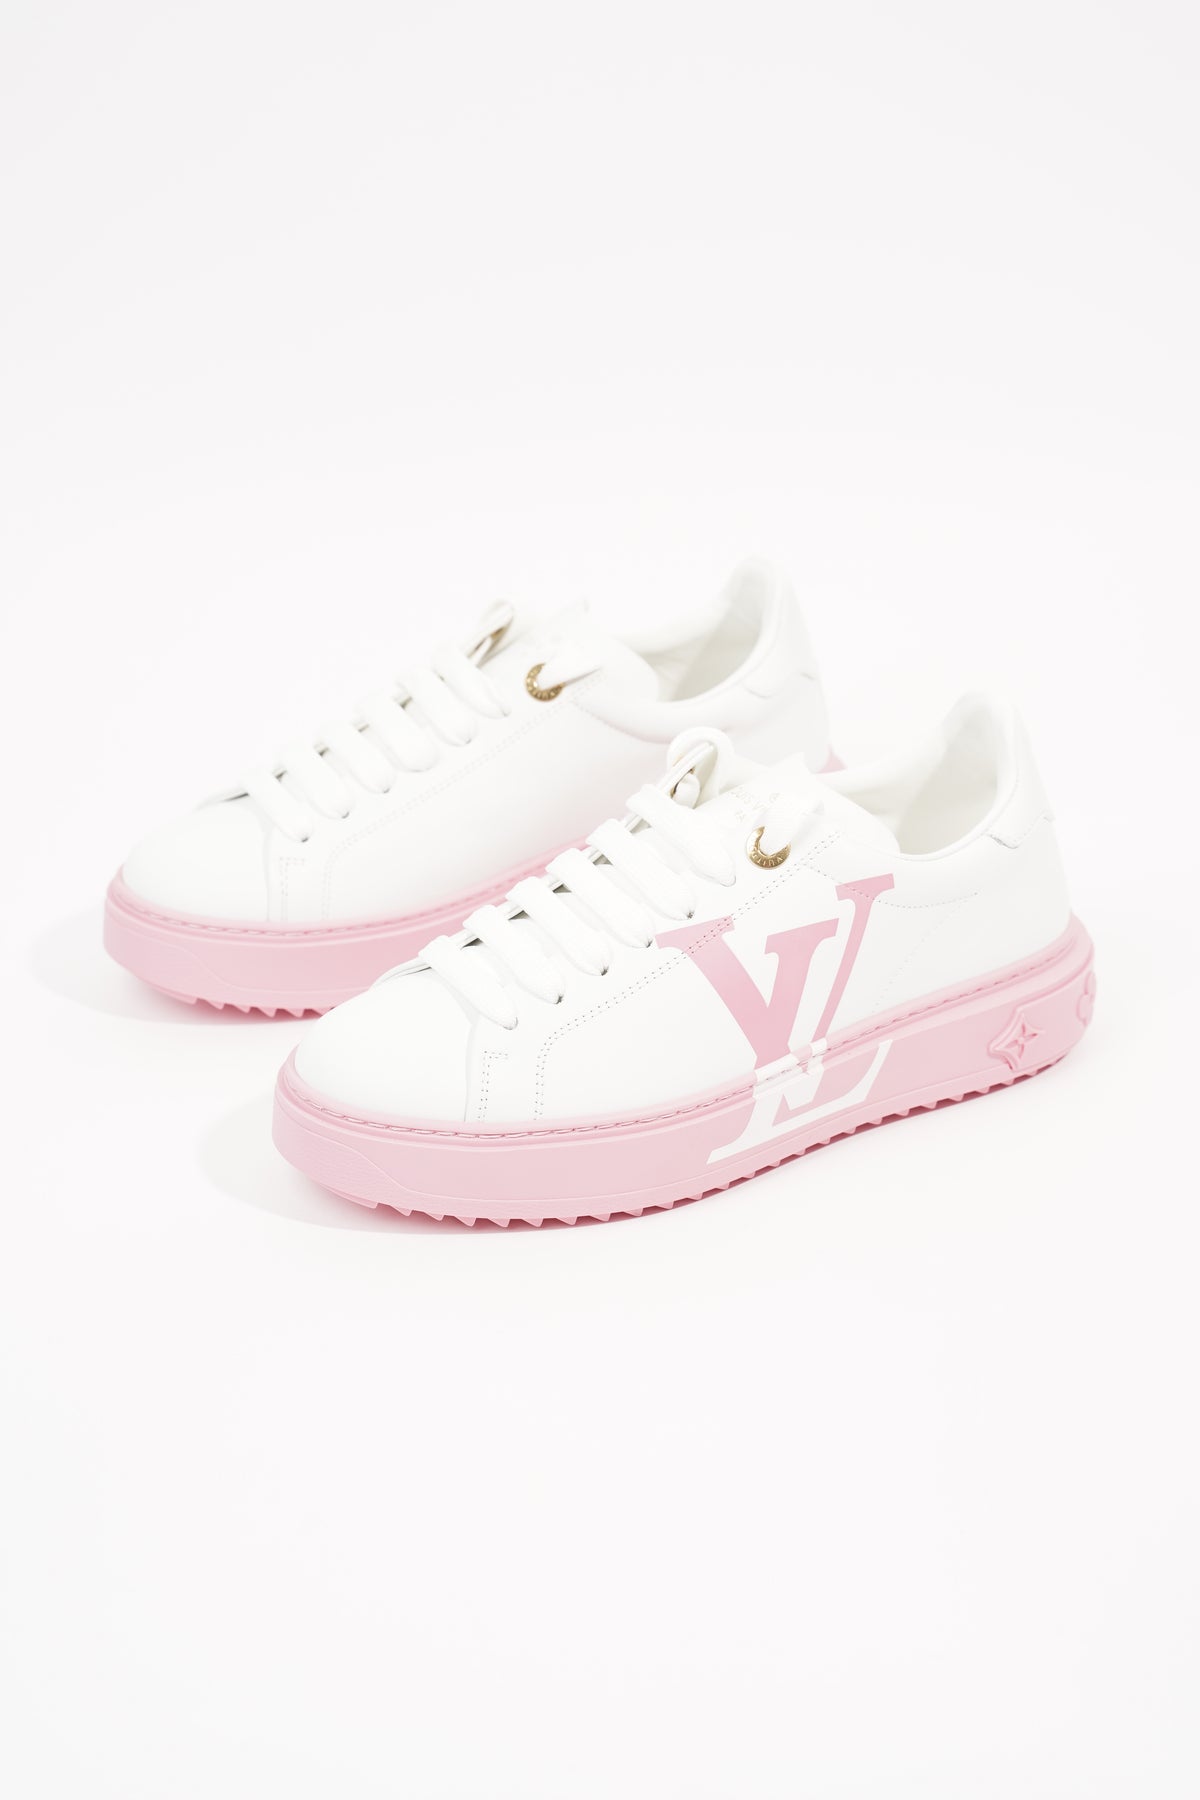 louis vuitton time out sneakers pink